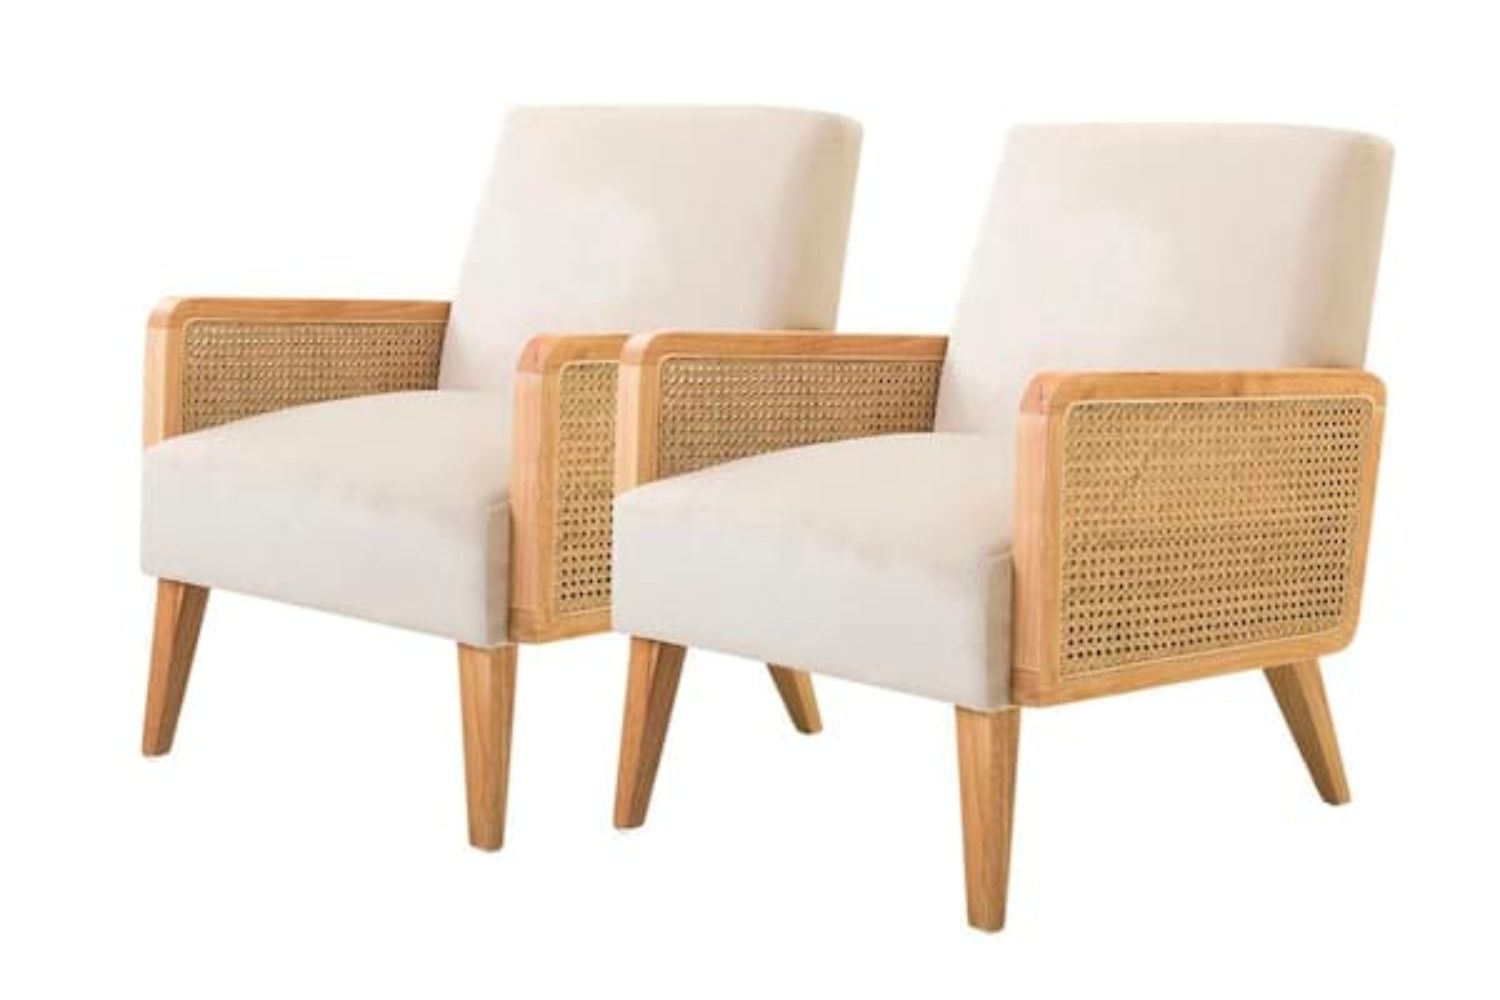 The Best Furniture You Can Find at Home Depot Right Now: Jayden Creation Delphine Beige Cane Accent Chair (Set of 2)